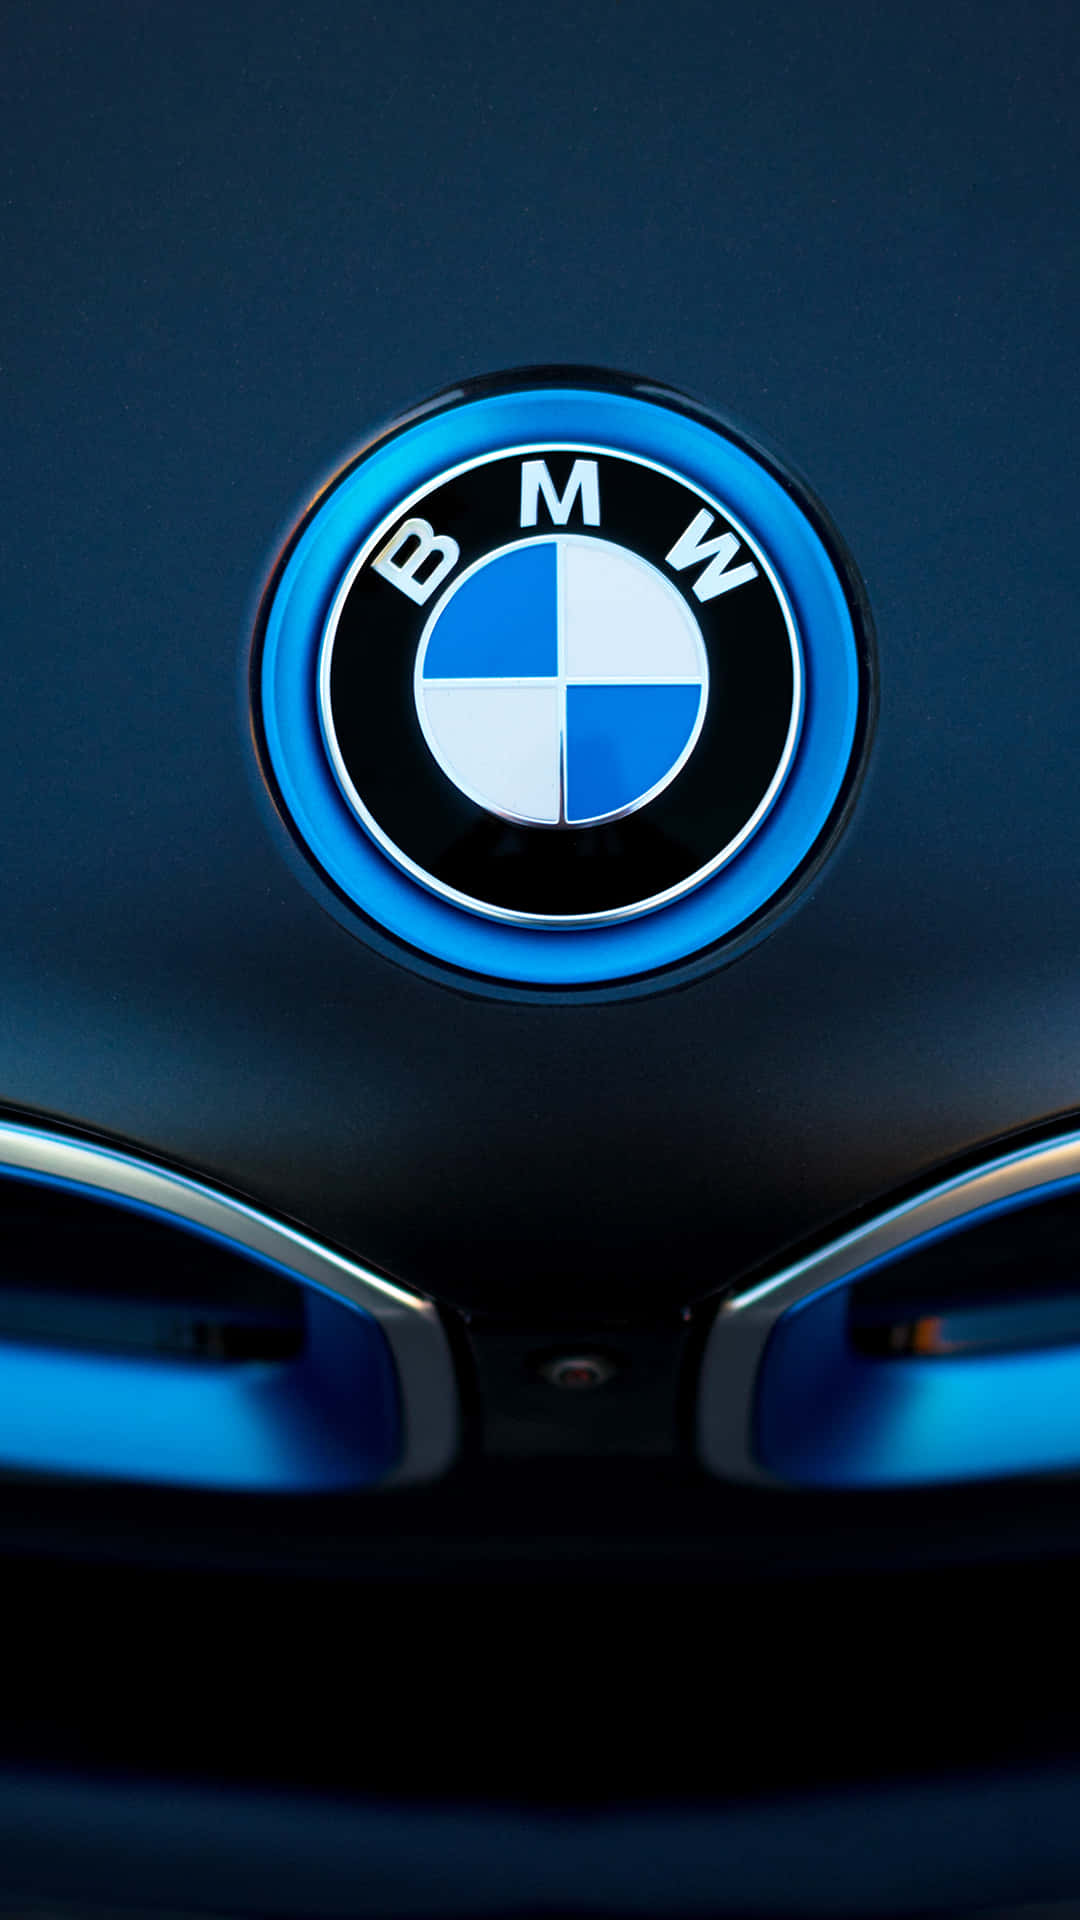 BMW Cars Redesigned with Android System Wallpaper